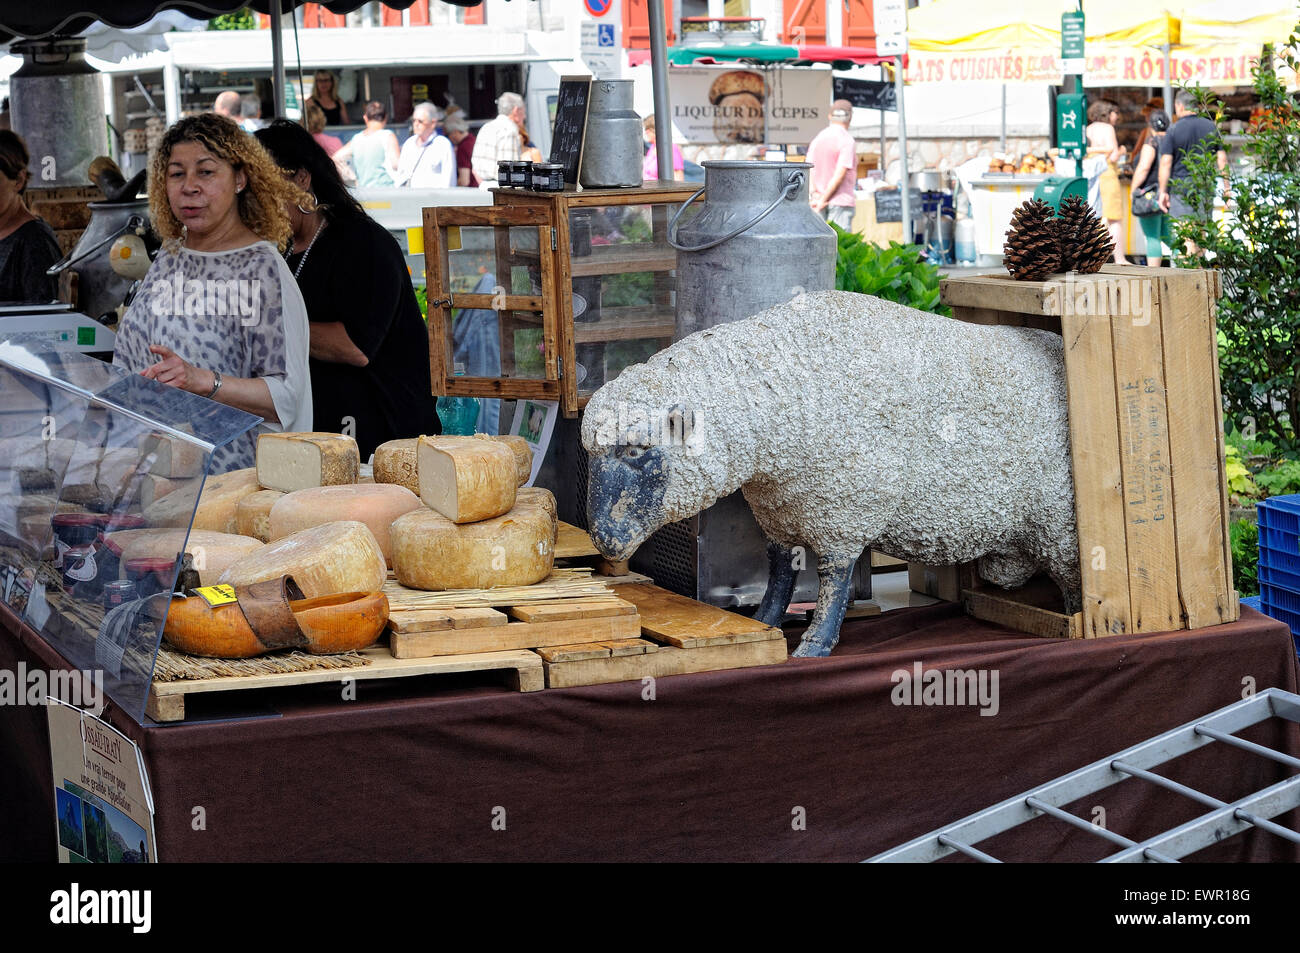 Stand selling artisan cheeses at a local market in Ciboure (Ziburu), France. Stock Photo